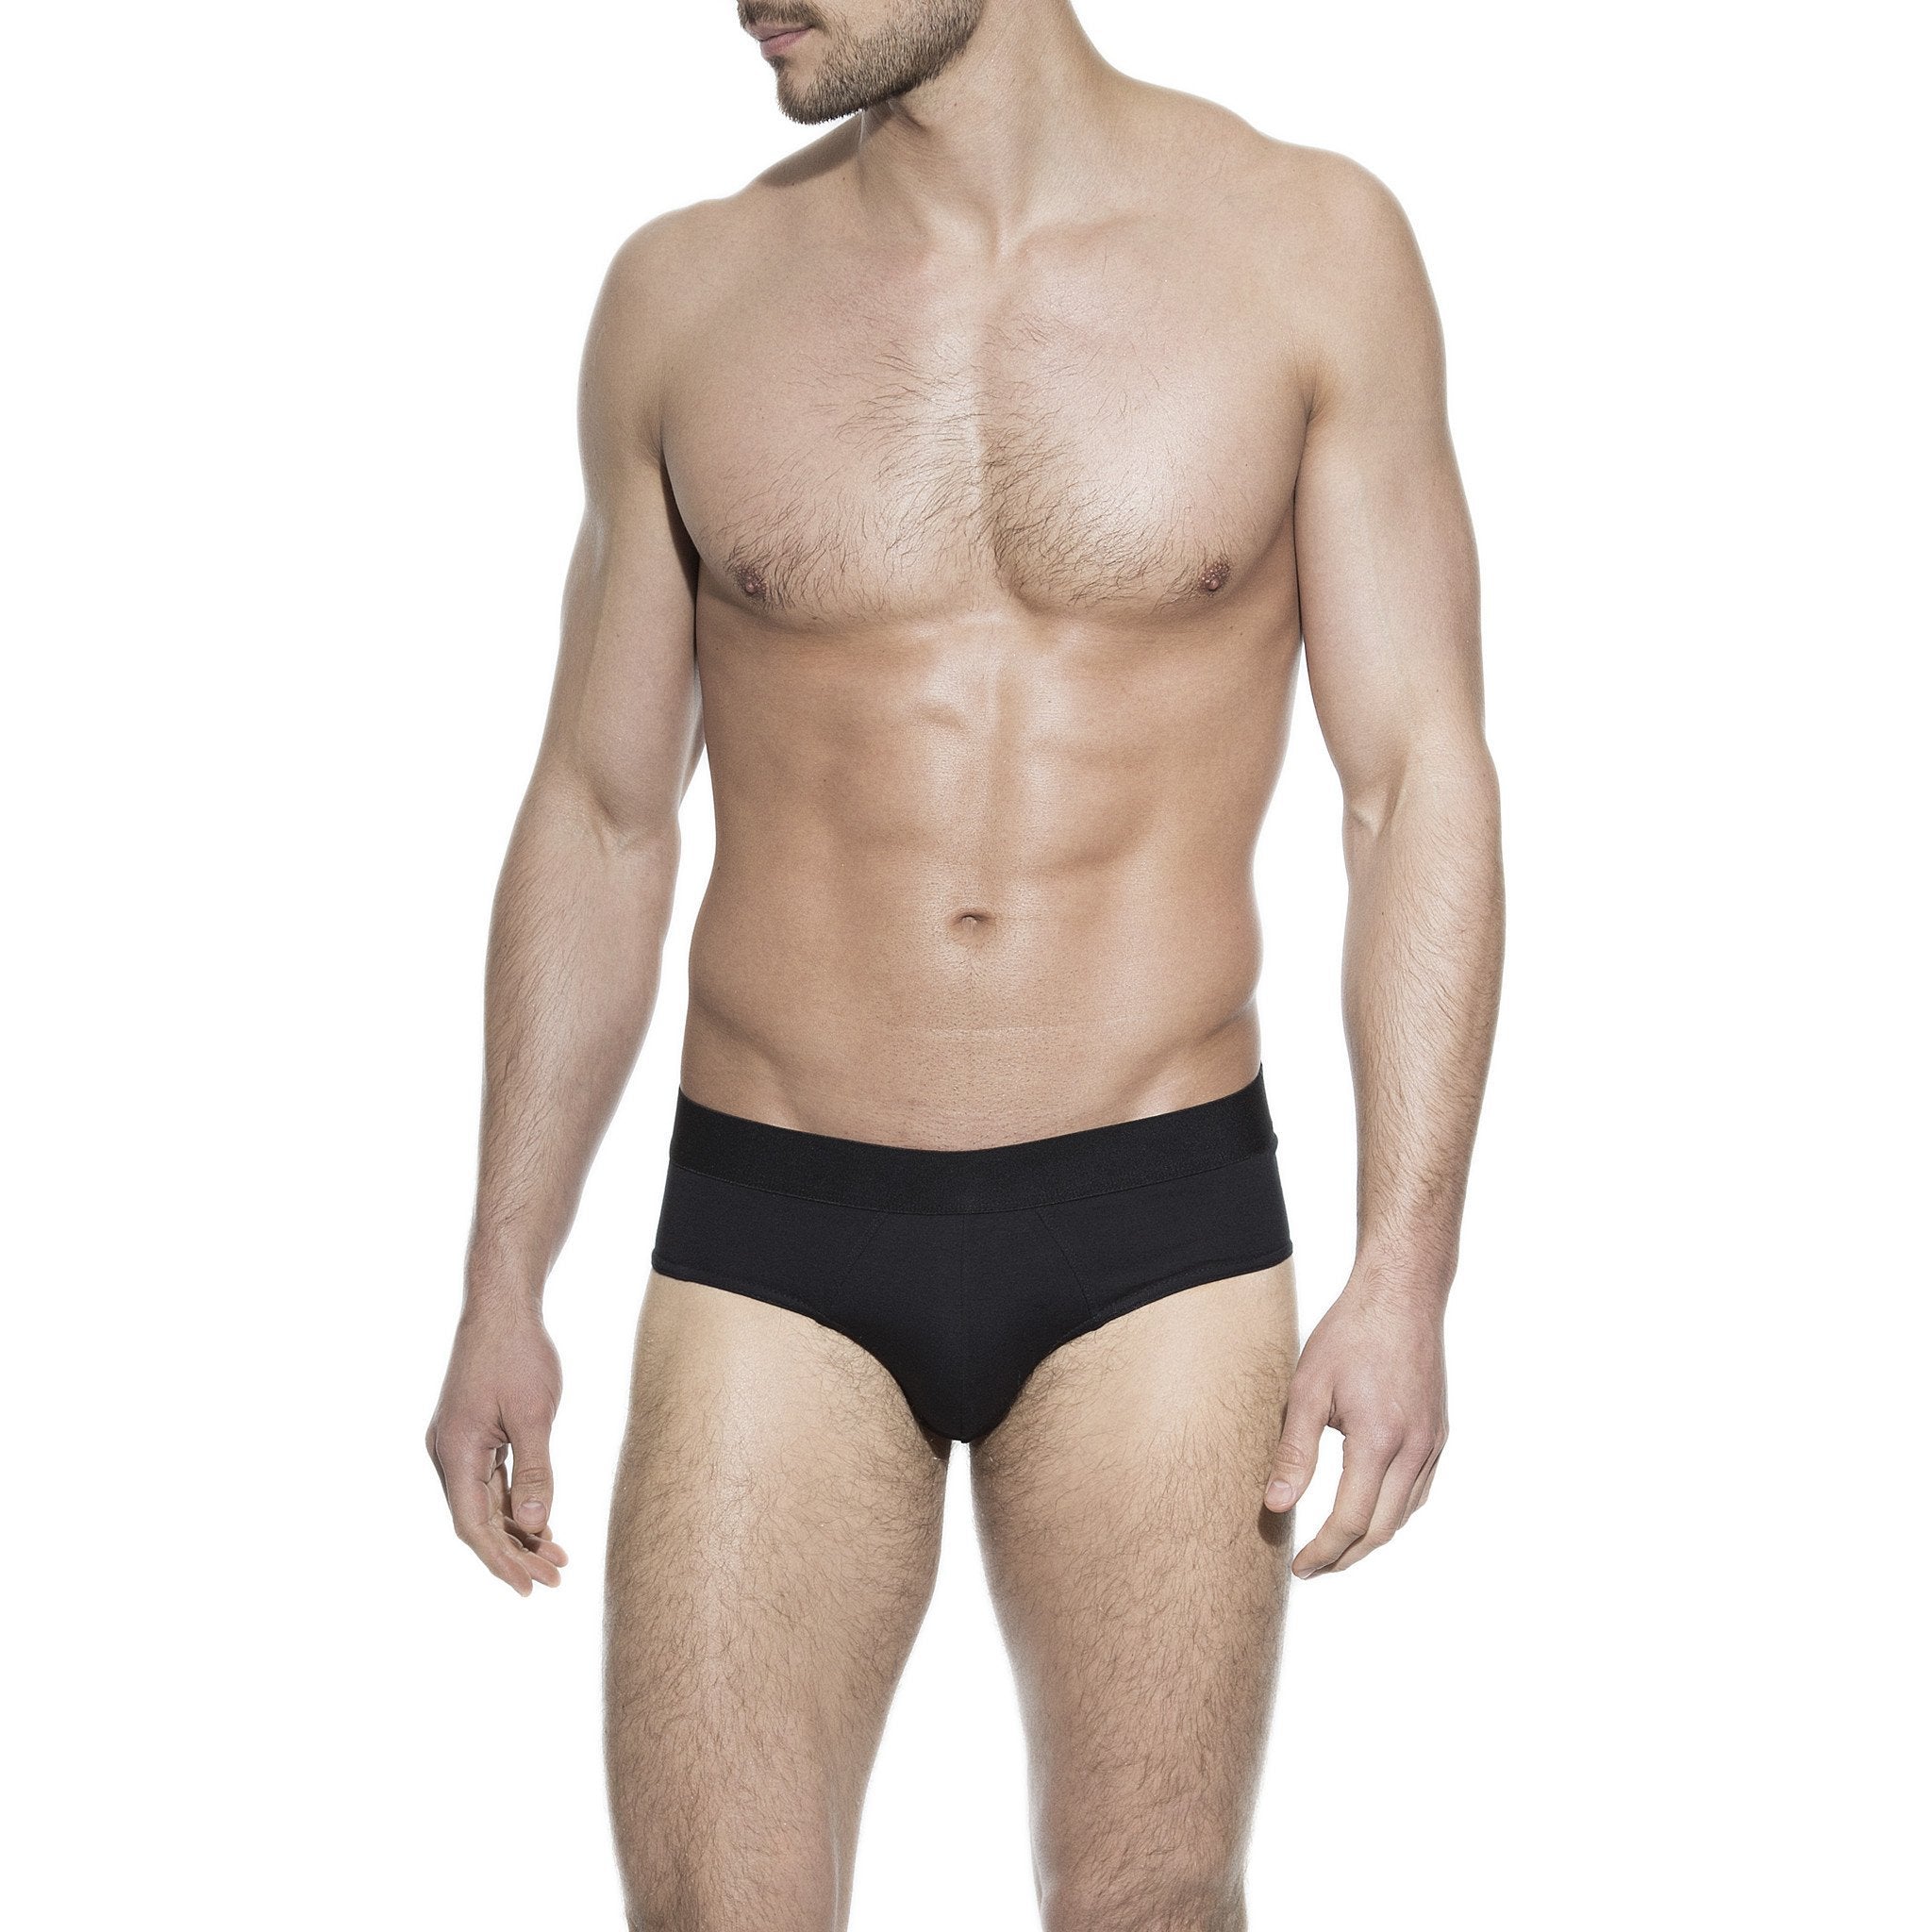 Bread & Boxers - Underwear, t shirts and loungewear online - Bread & Boxers